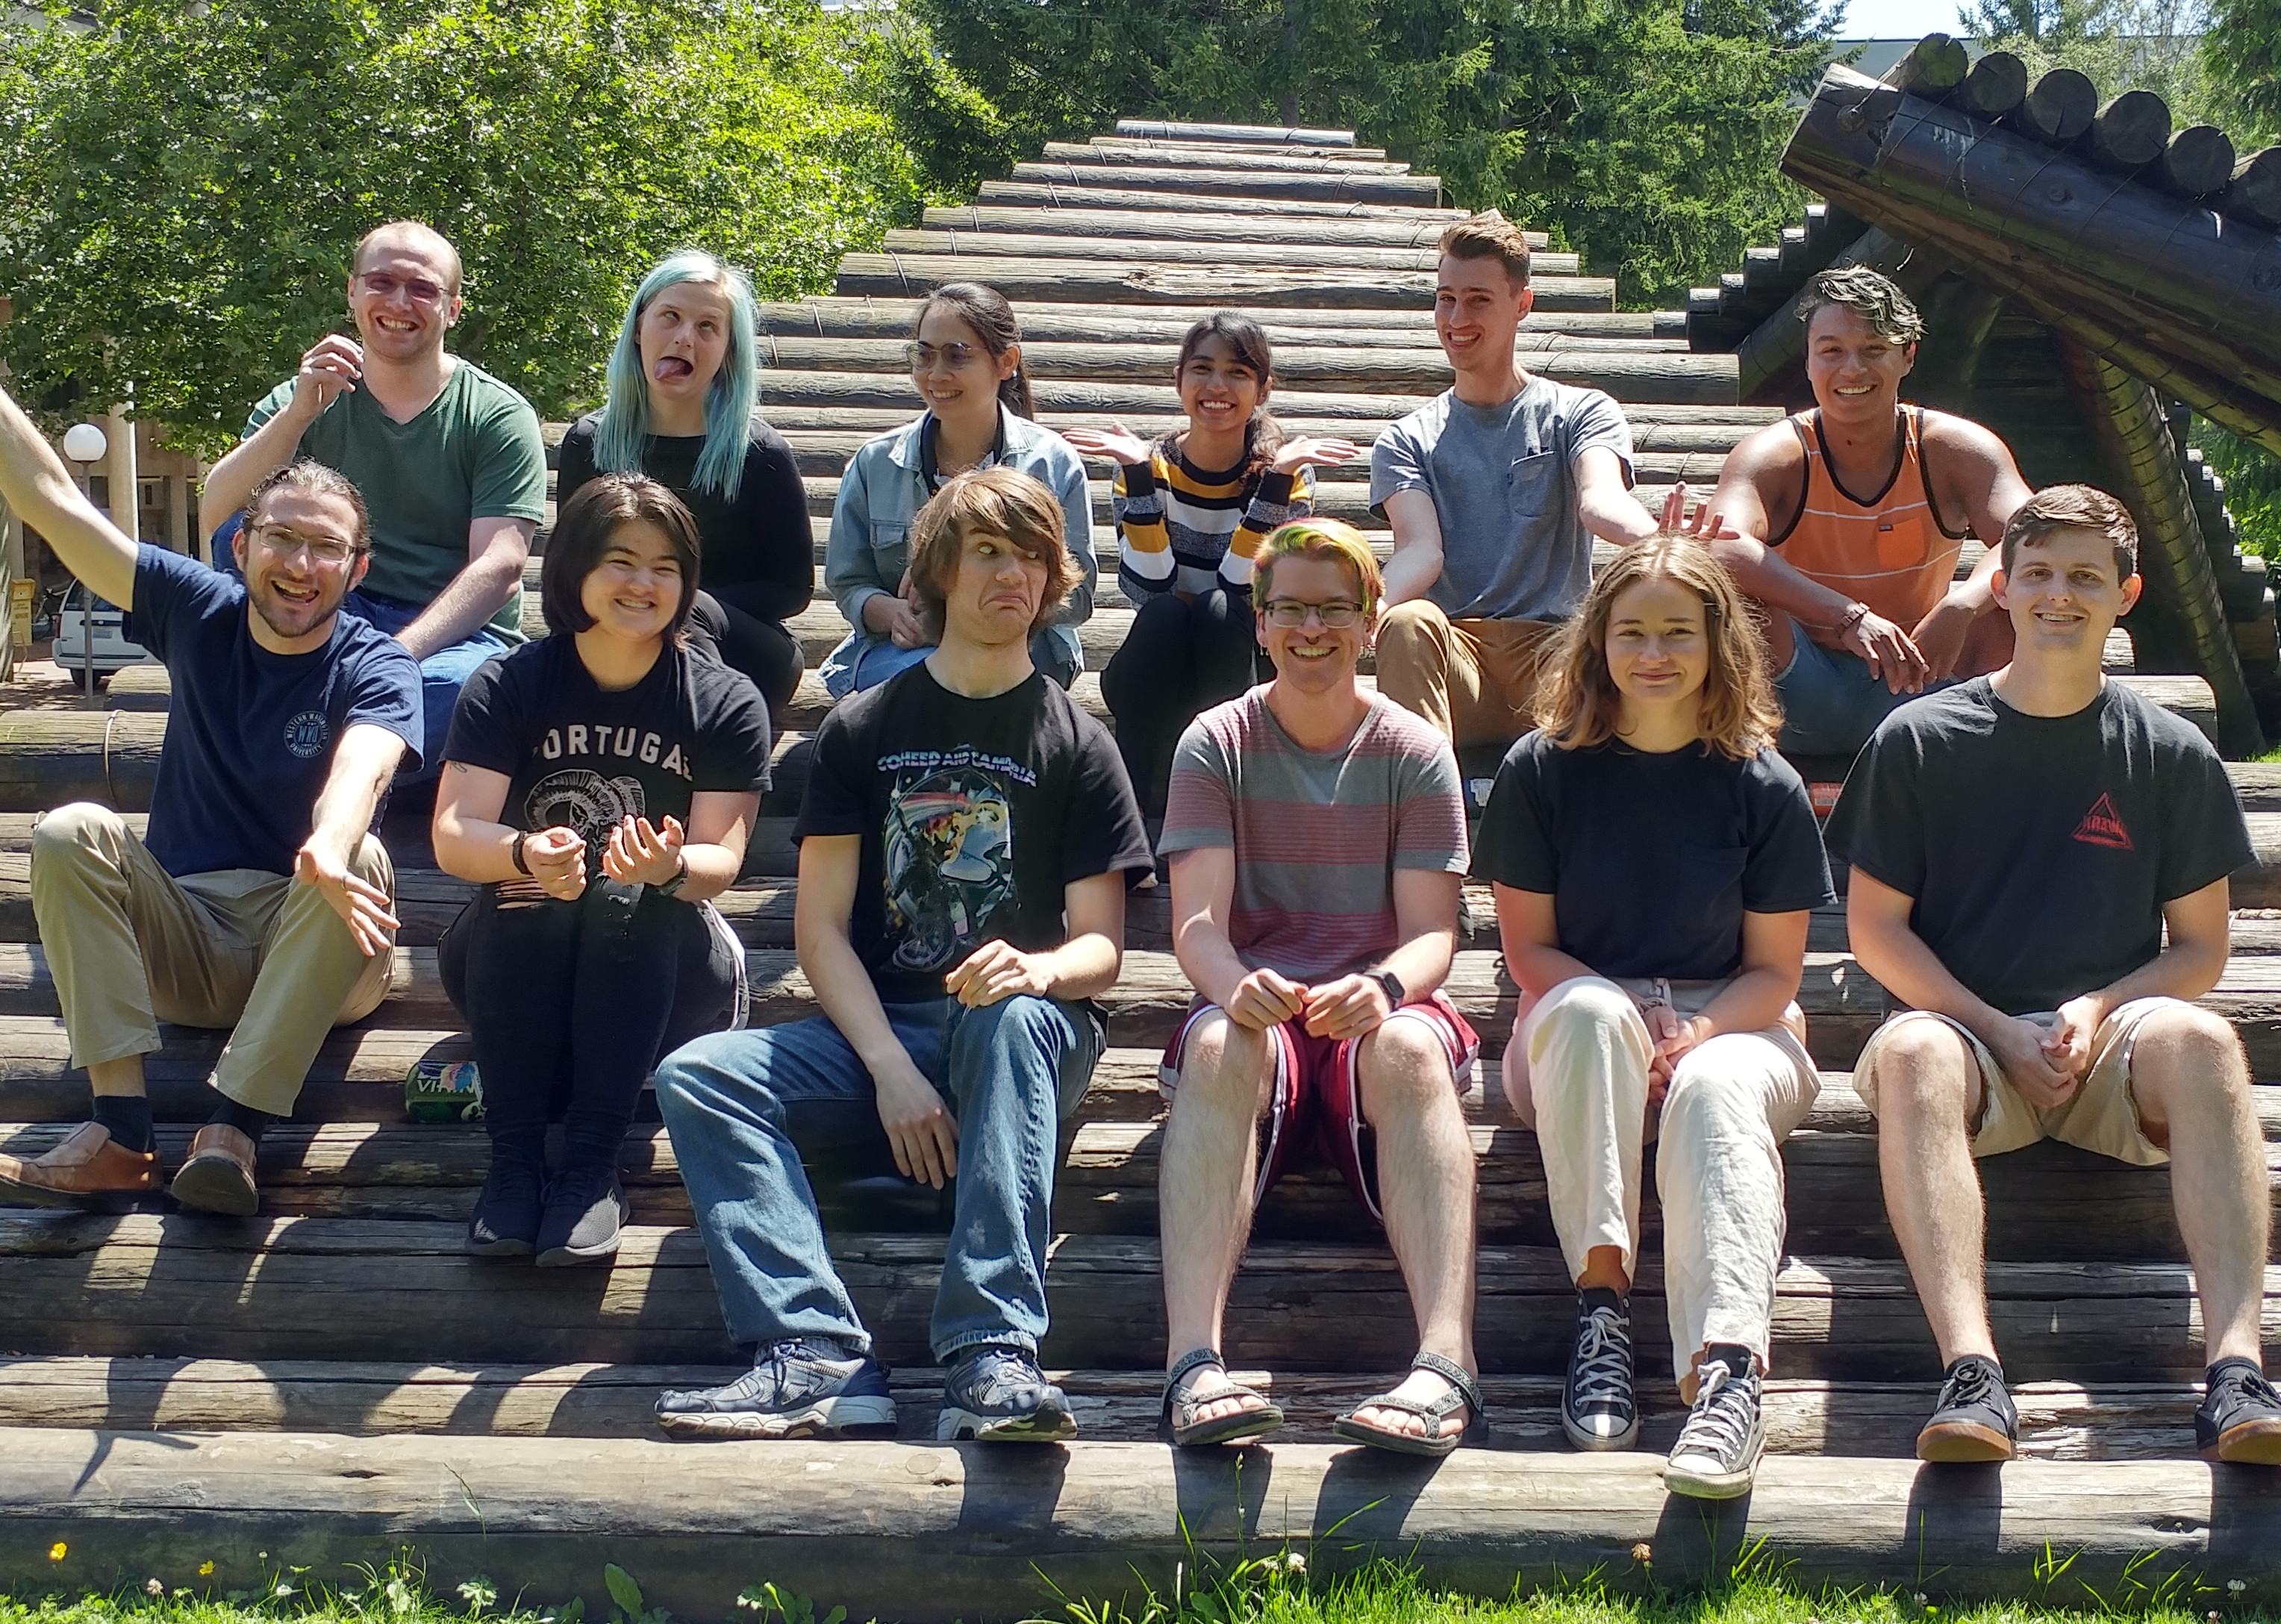 A group of students pose on a wooden sculpture Summer 2019